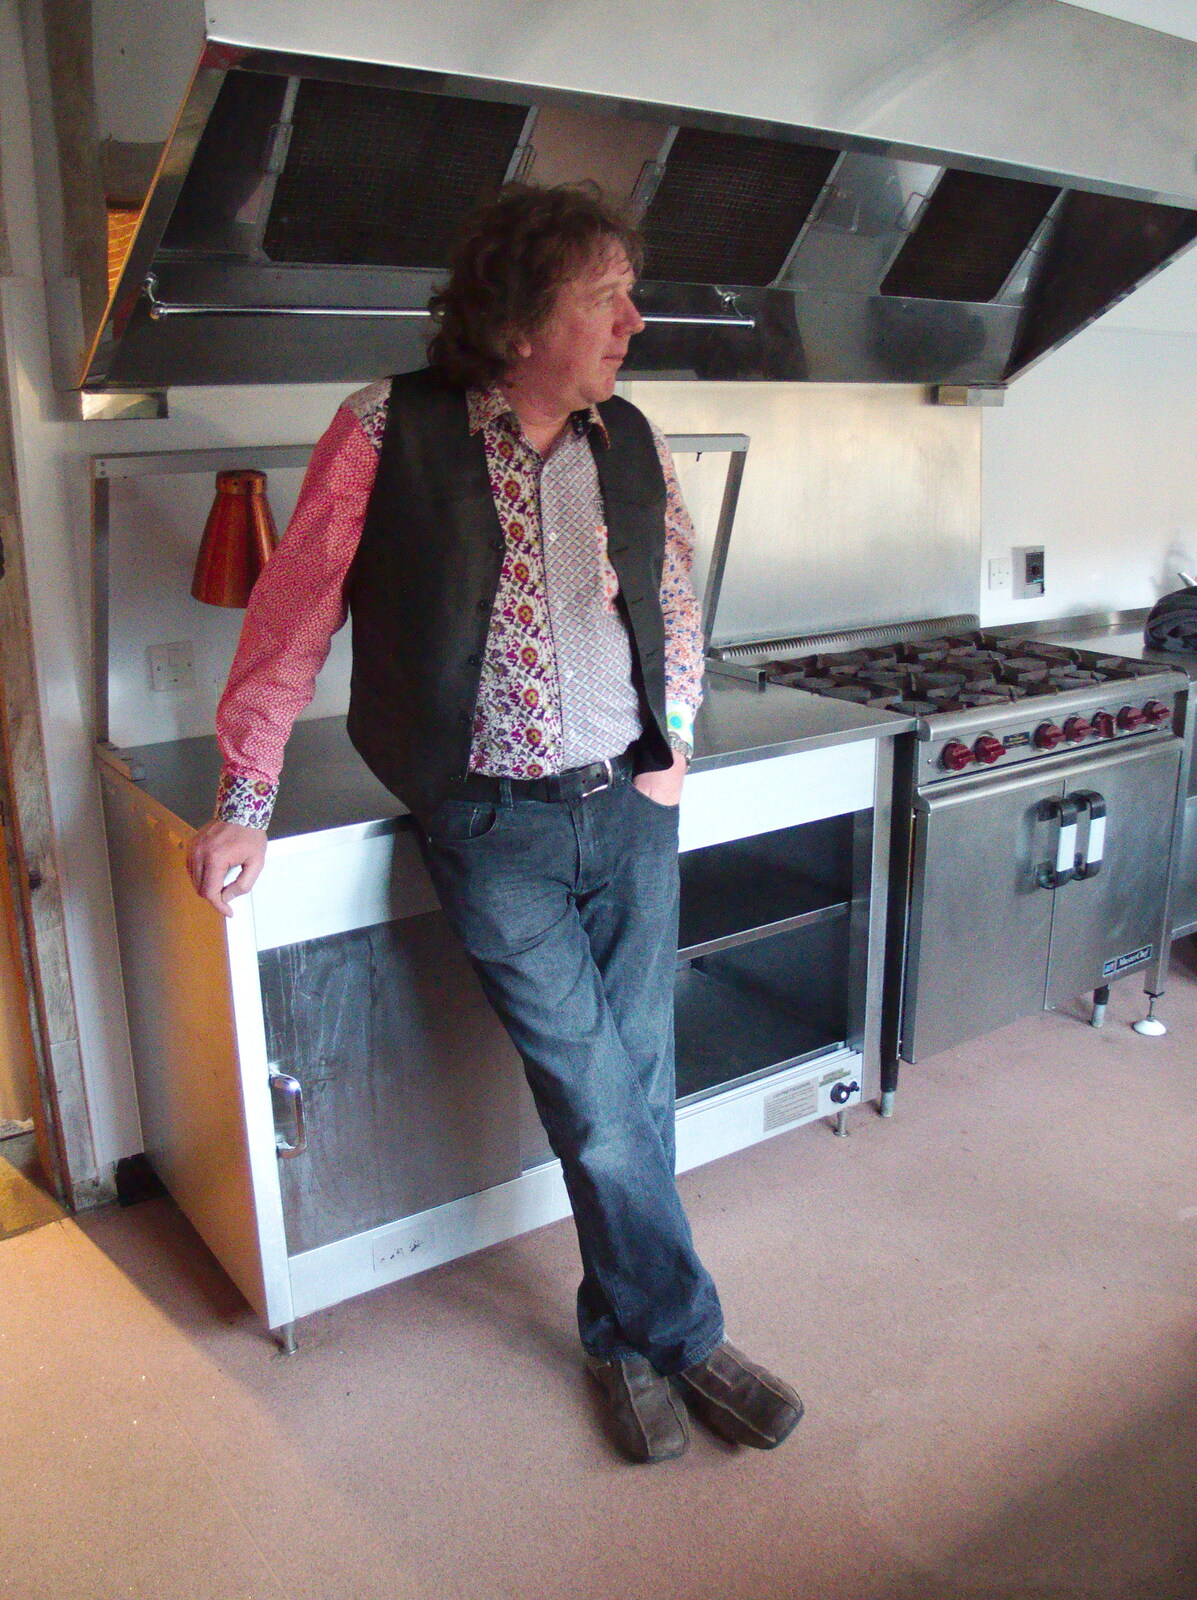 Max leans on an oven from The BBs Play Haughley Park Barn, Haughley, Suffolk - 26th April 2014